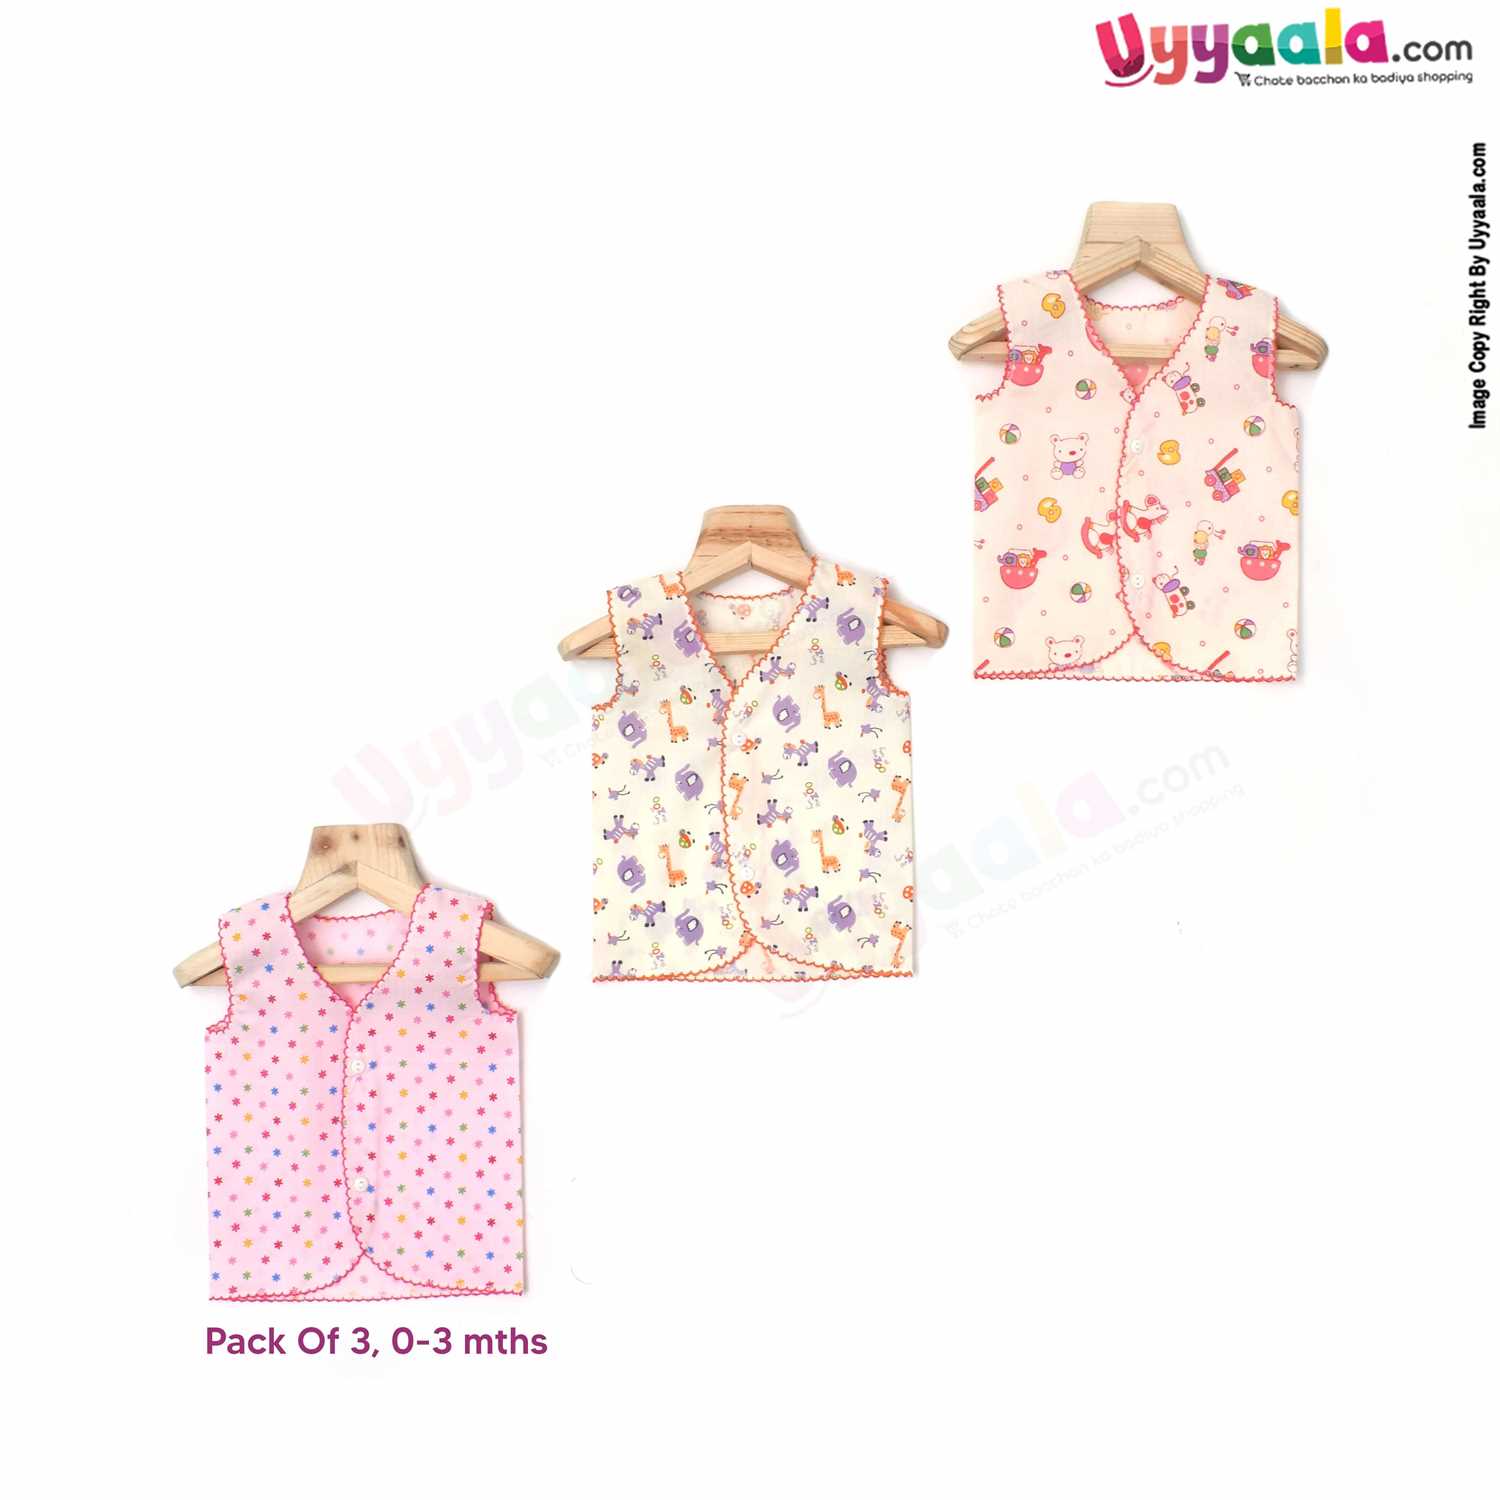 POLAR CUBS Sleeveless Baby Jabla Set, Front Opening Button Model, Premium Quality Cotton Baby Wear, Assorted Prints, (0-3M), 3Pack - Multicolor